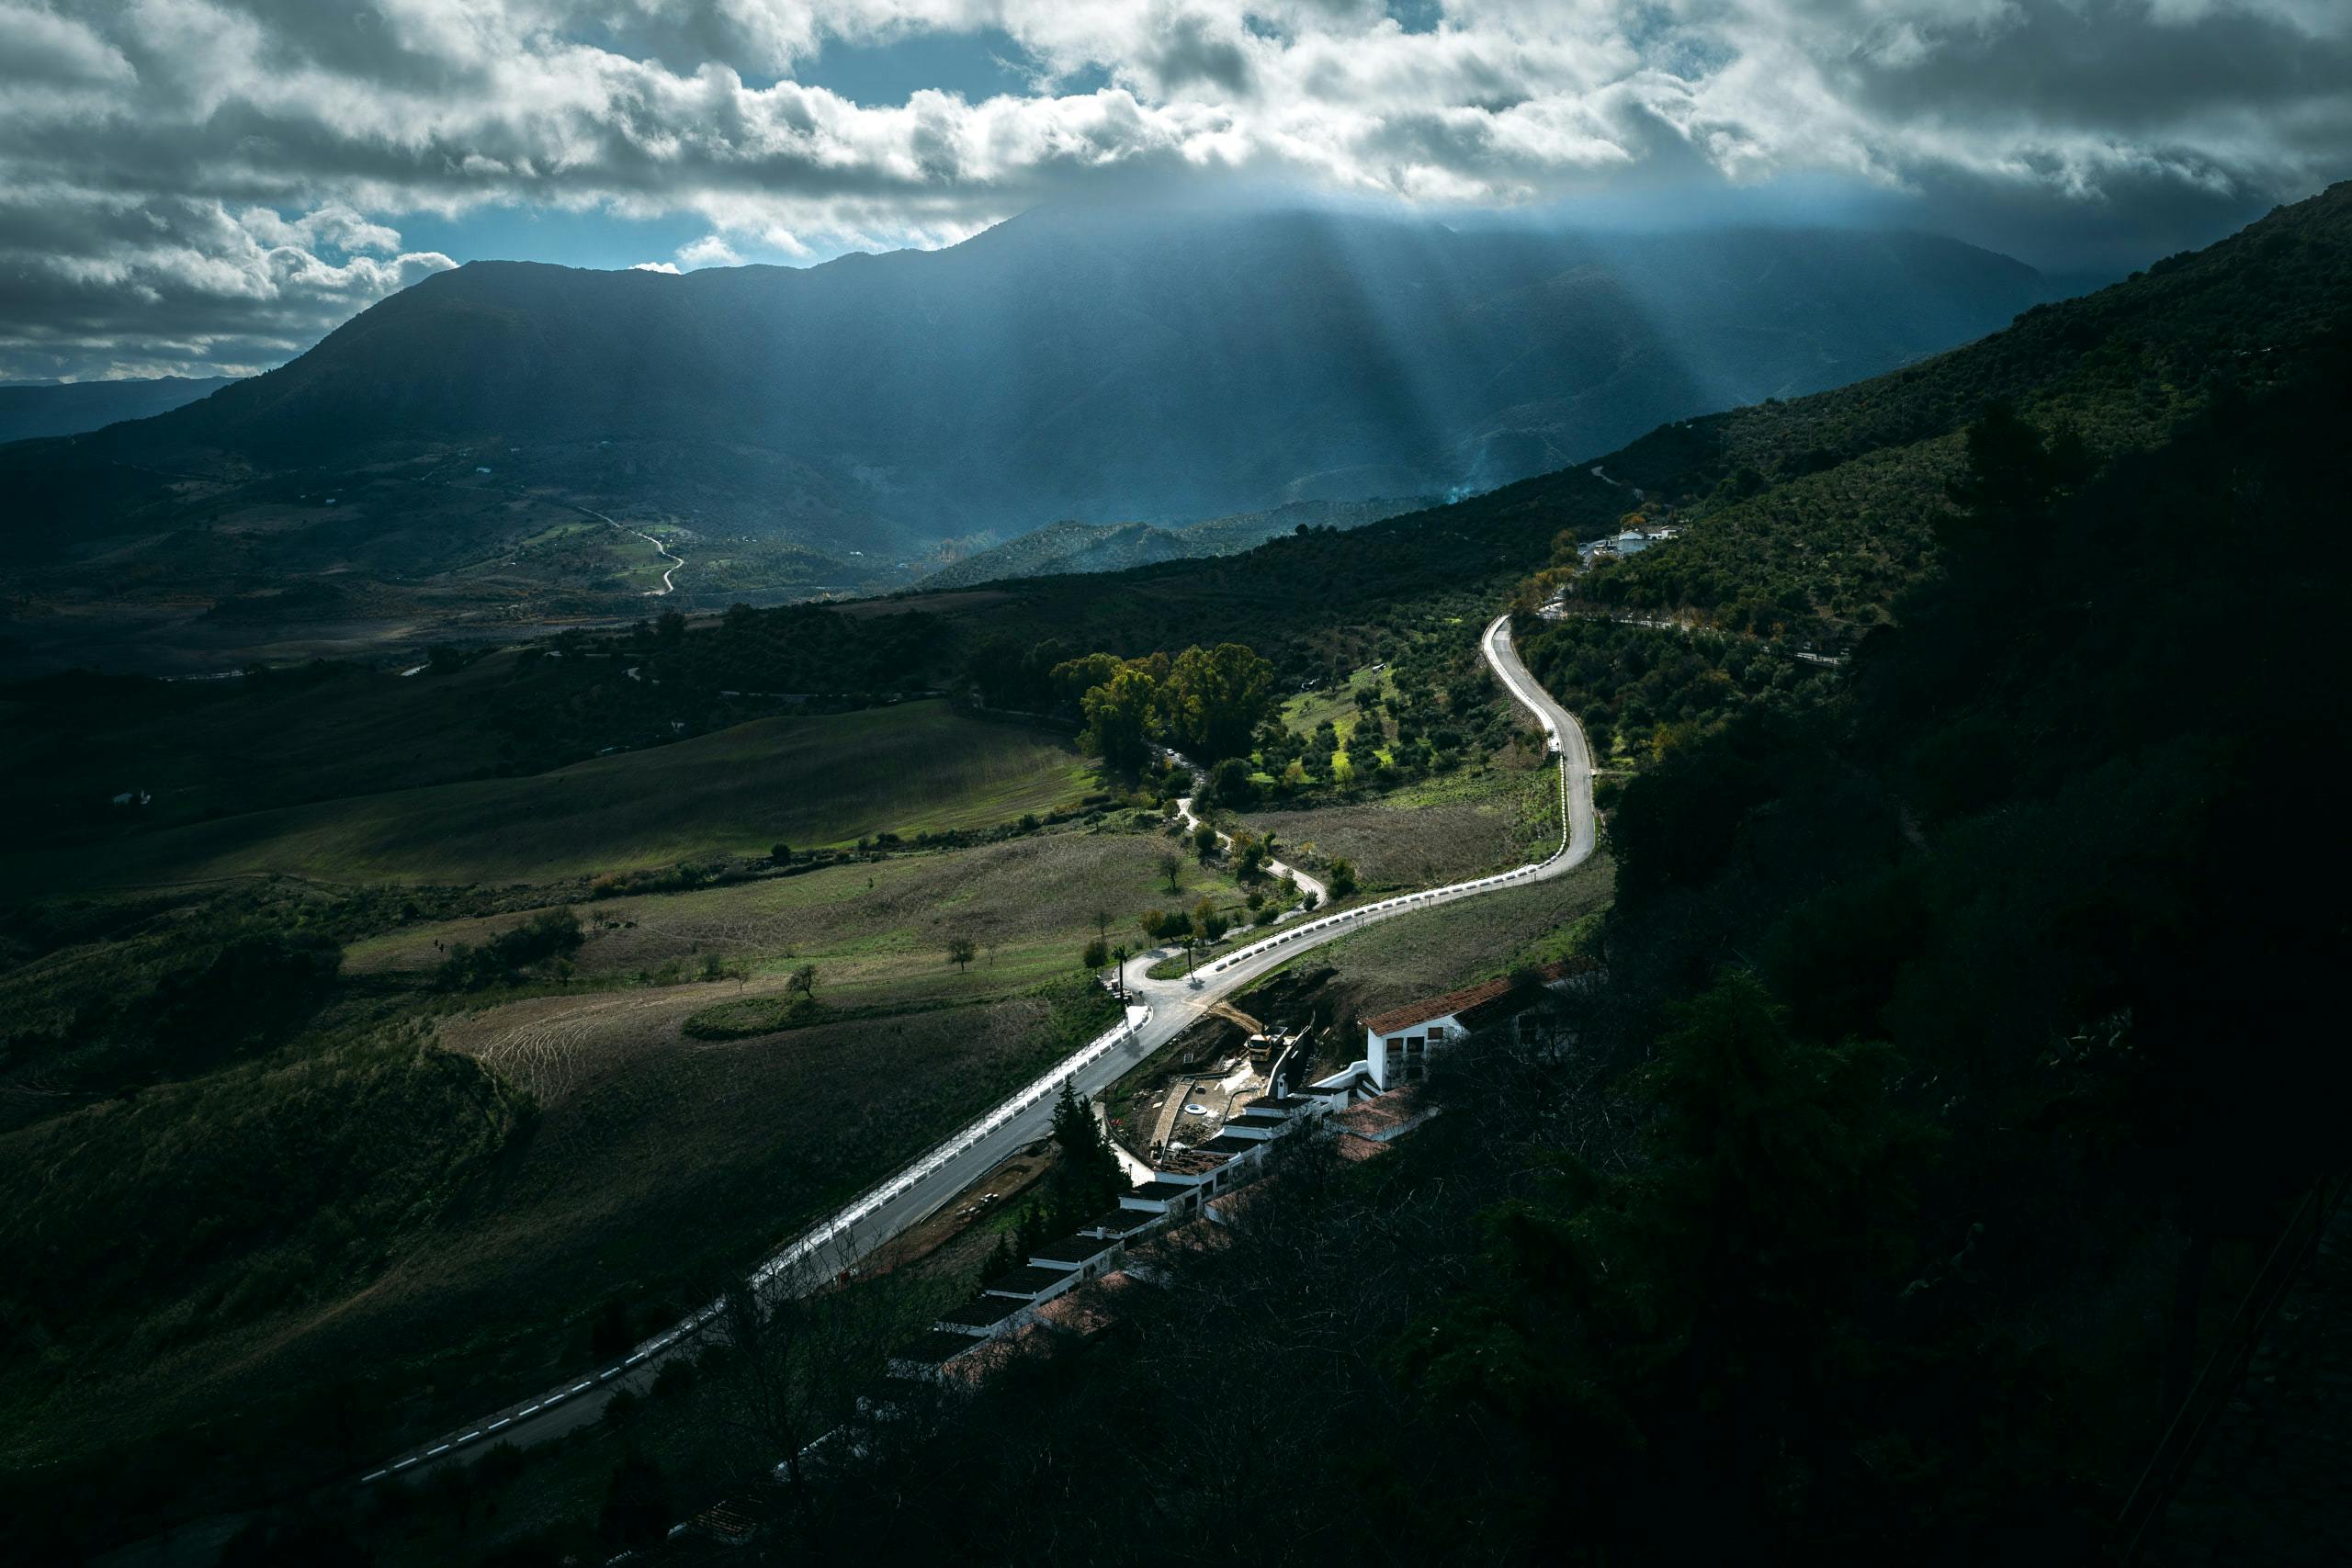 View of a road illuminated by streams of light from the cloudy sky